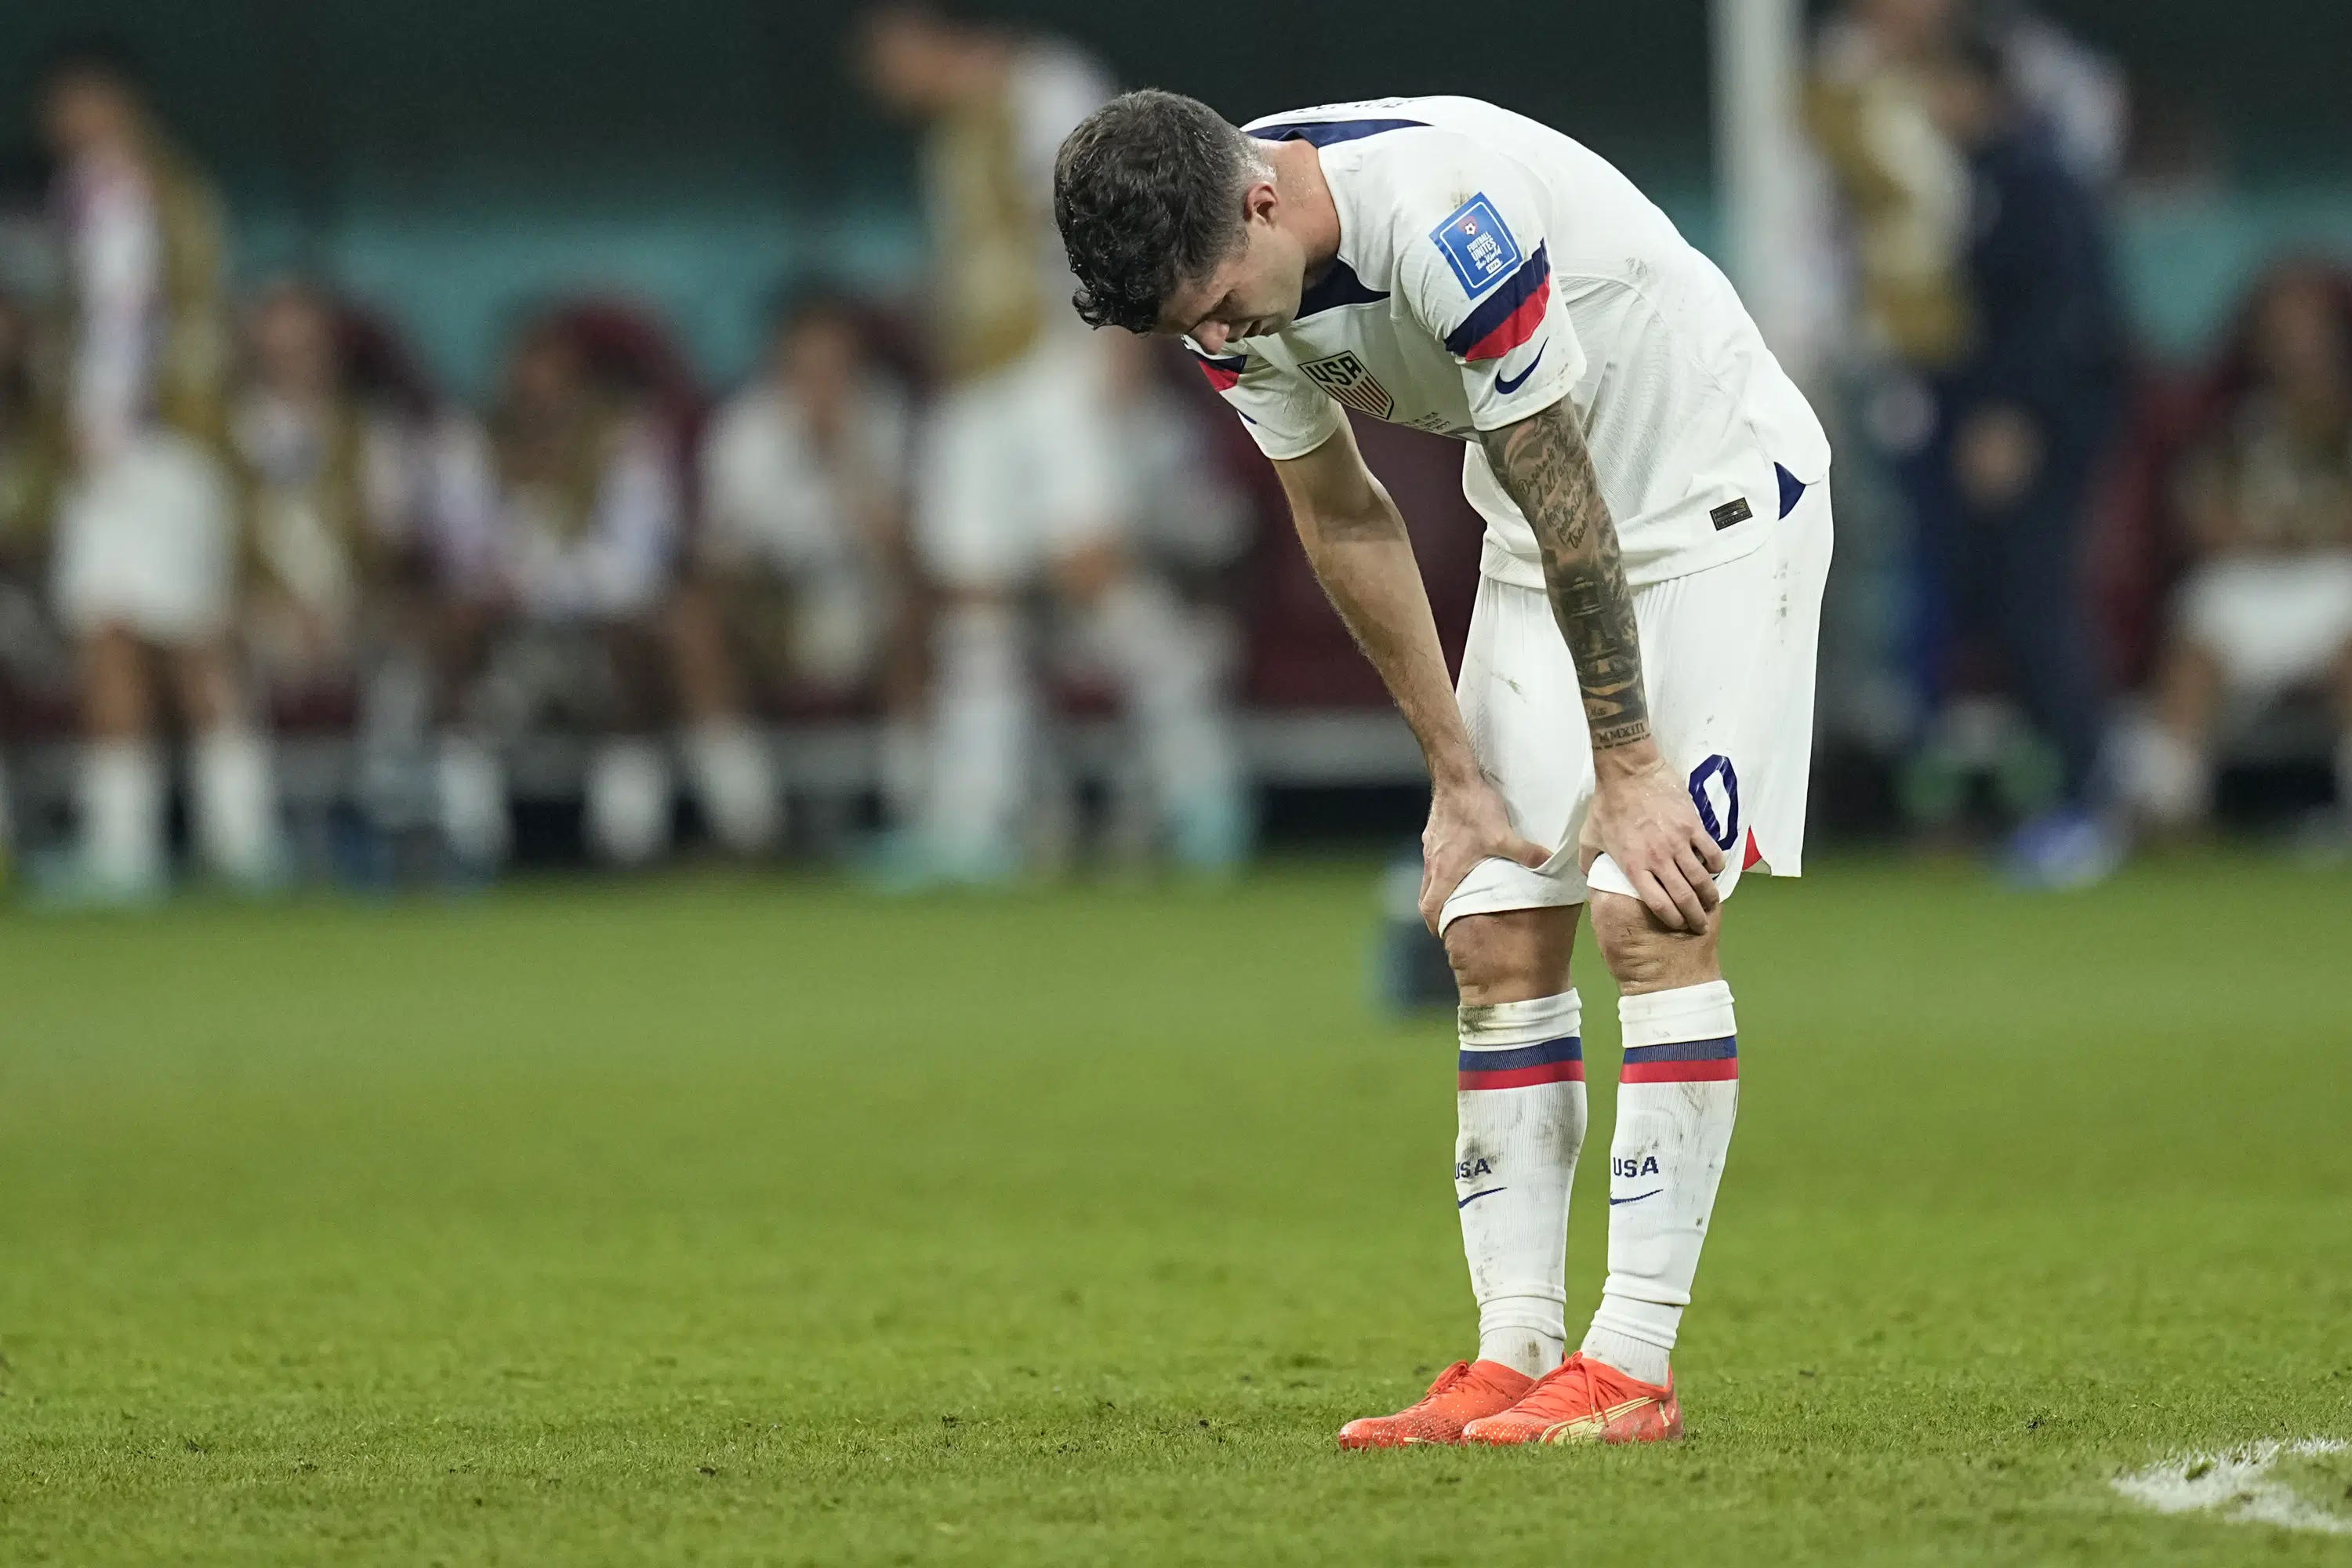 USA eliminated at World Cup, loses 3-1 to the Netherlands